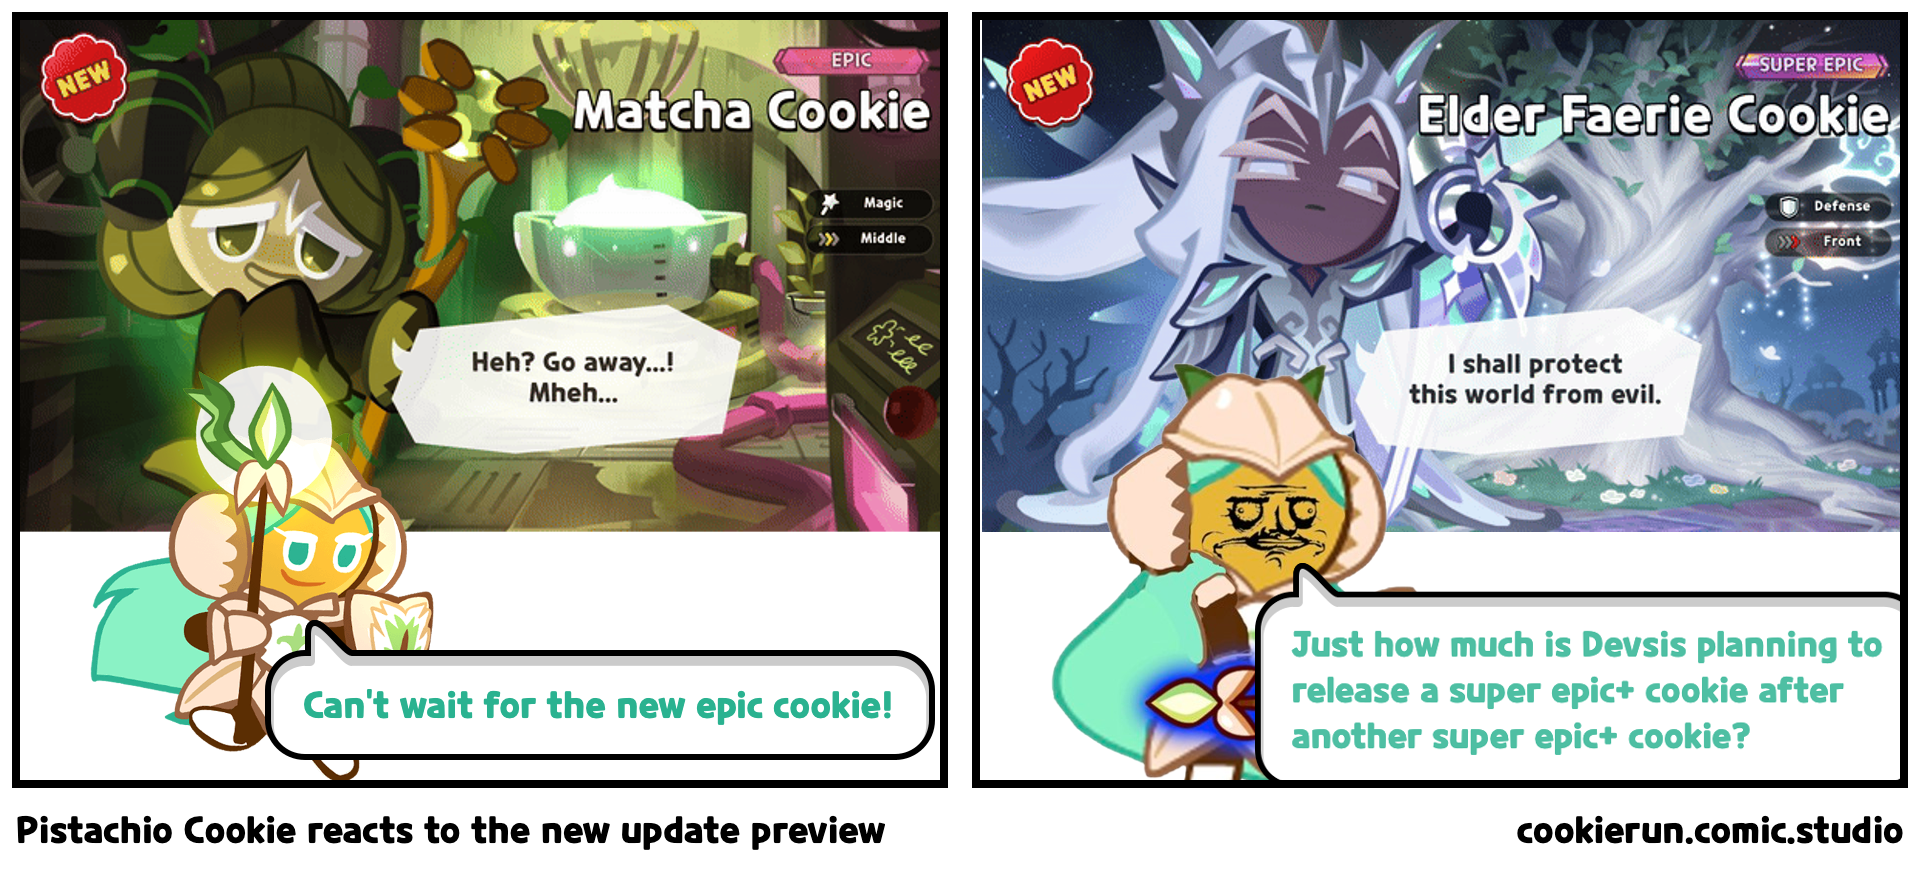 Pistachio Cookie reacts to the new update preview